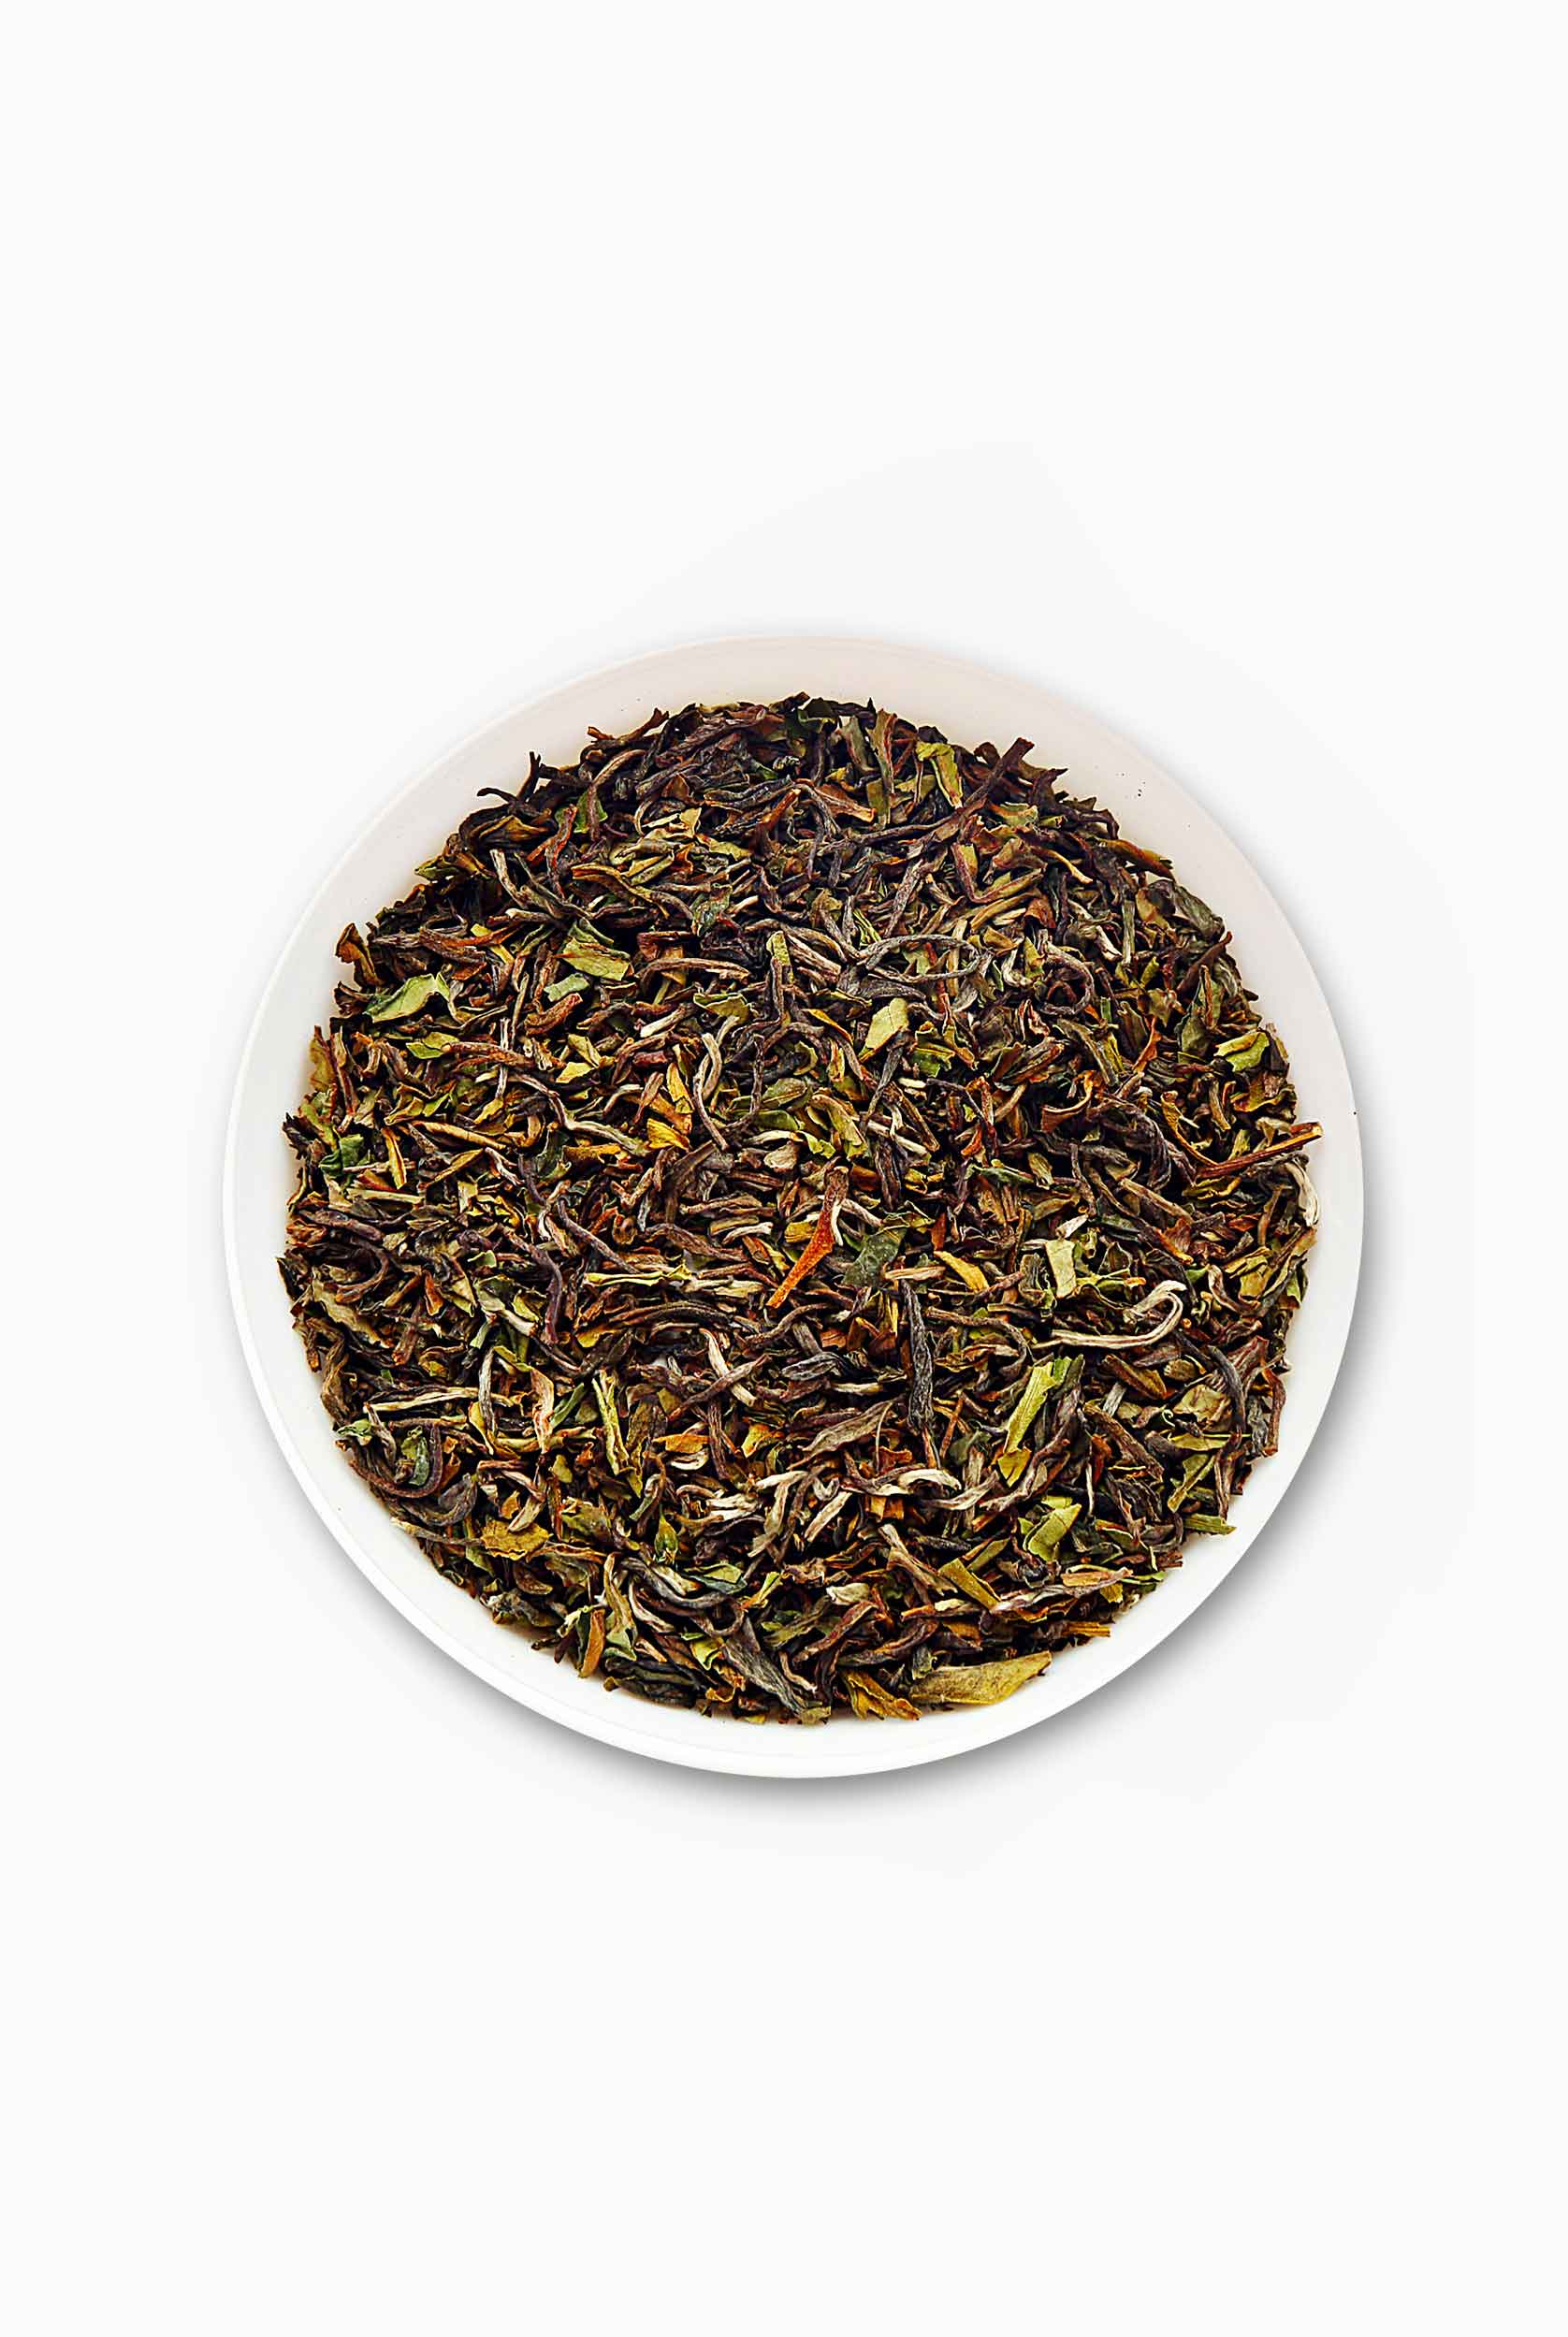 Darjeeling Tea First Flush - Single Estate, selected by Tea Planters who have worked in Darjeeling Gardens, best Darjeeling Tea,   best Darjeeling tea online, best Darjeeling tea brand,  best Darjeeling tea estates, best Darjeeling tea brands in India